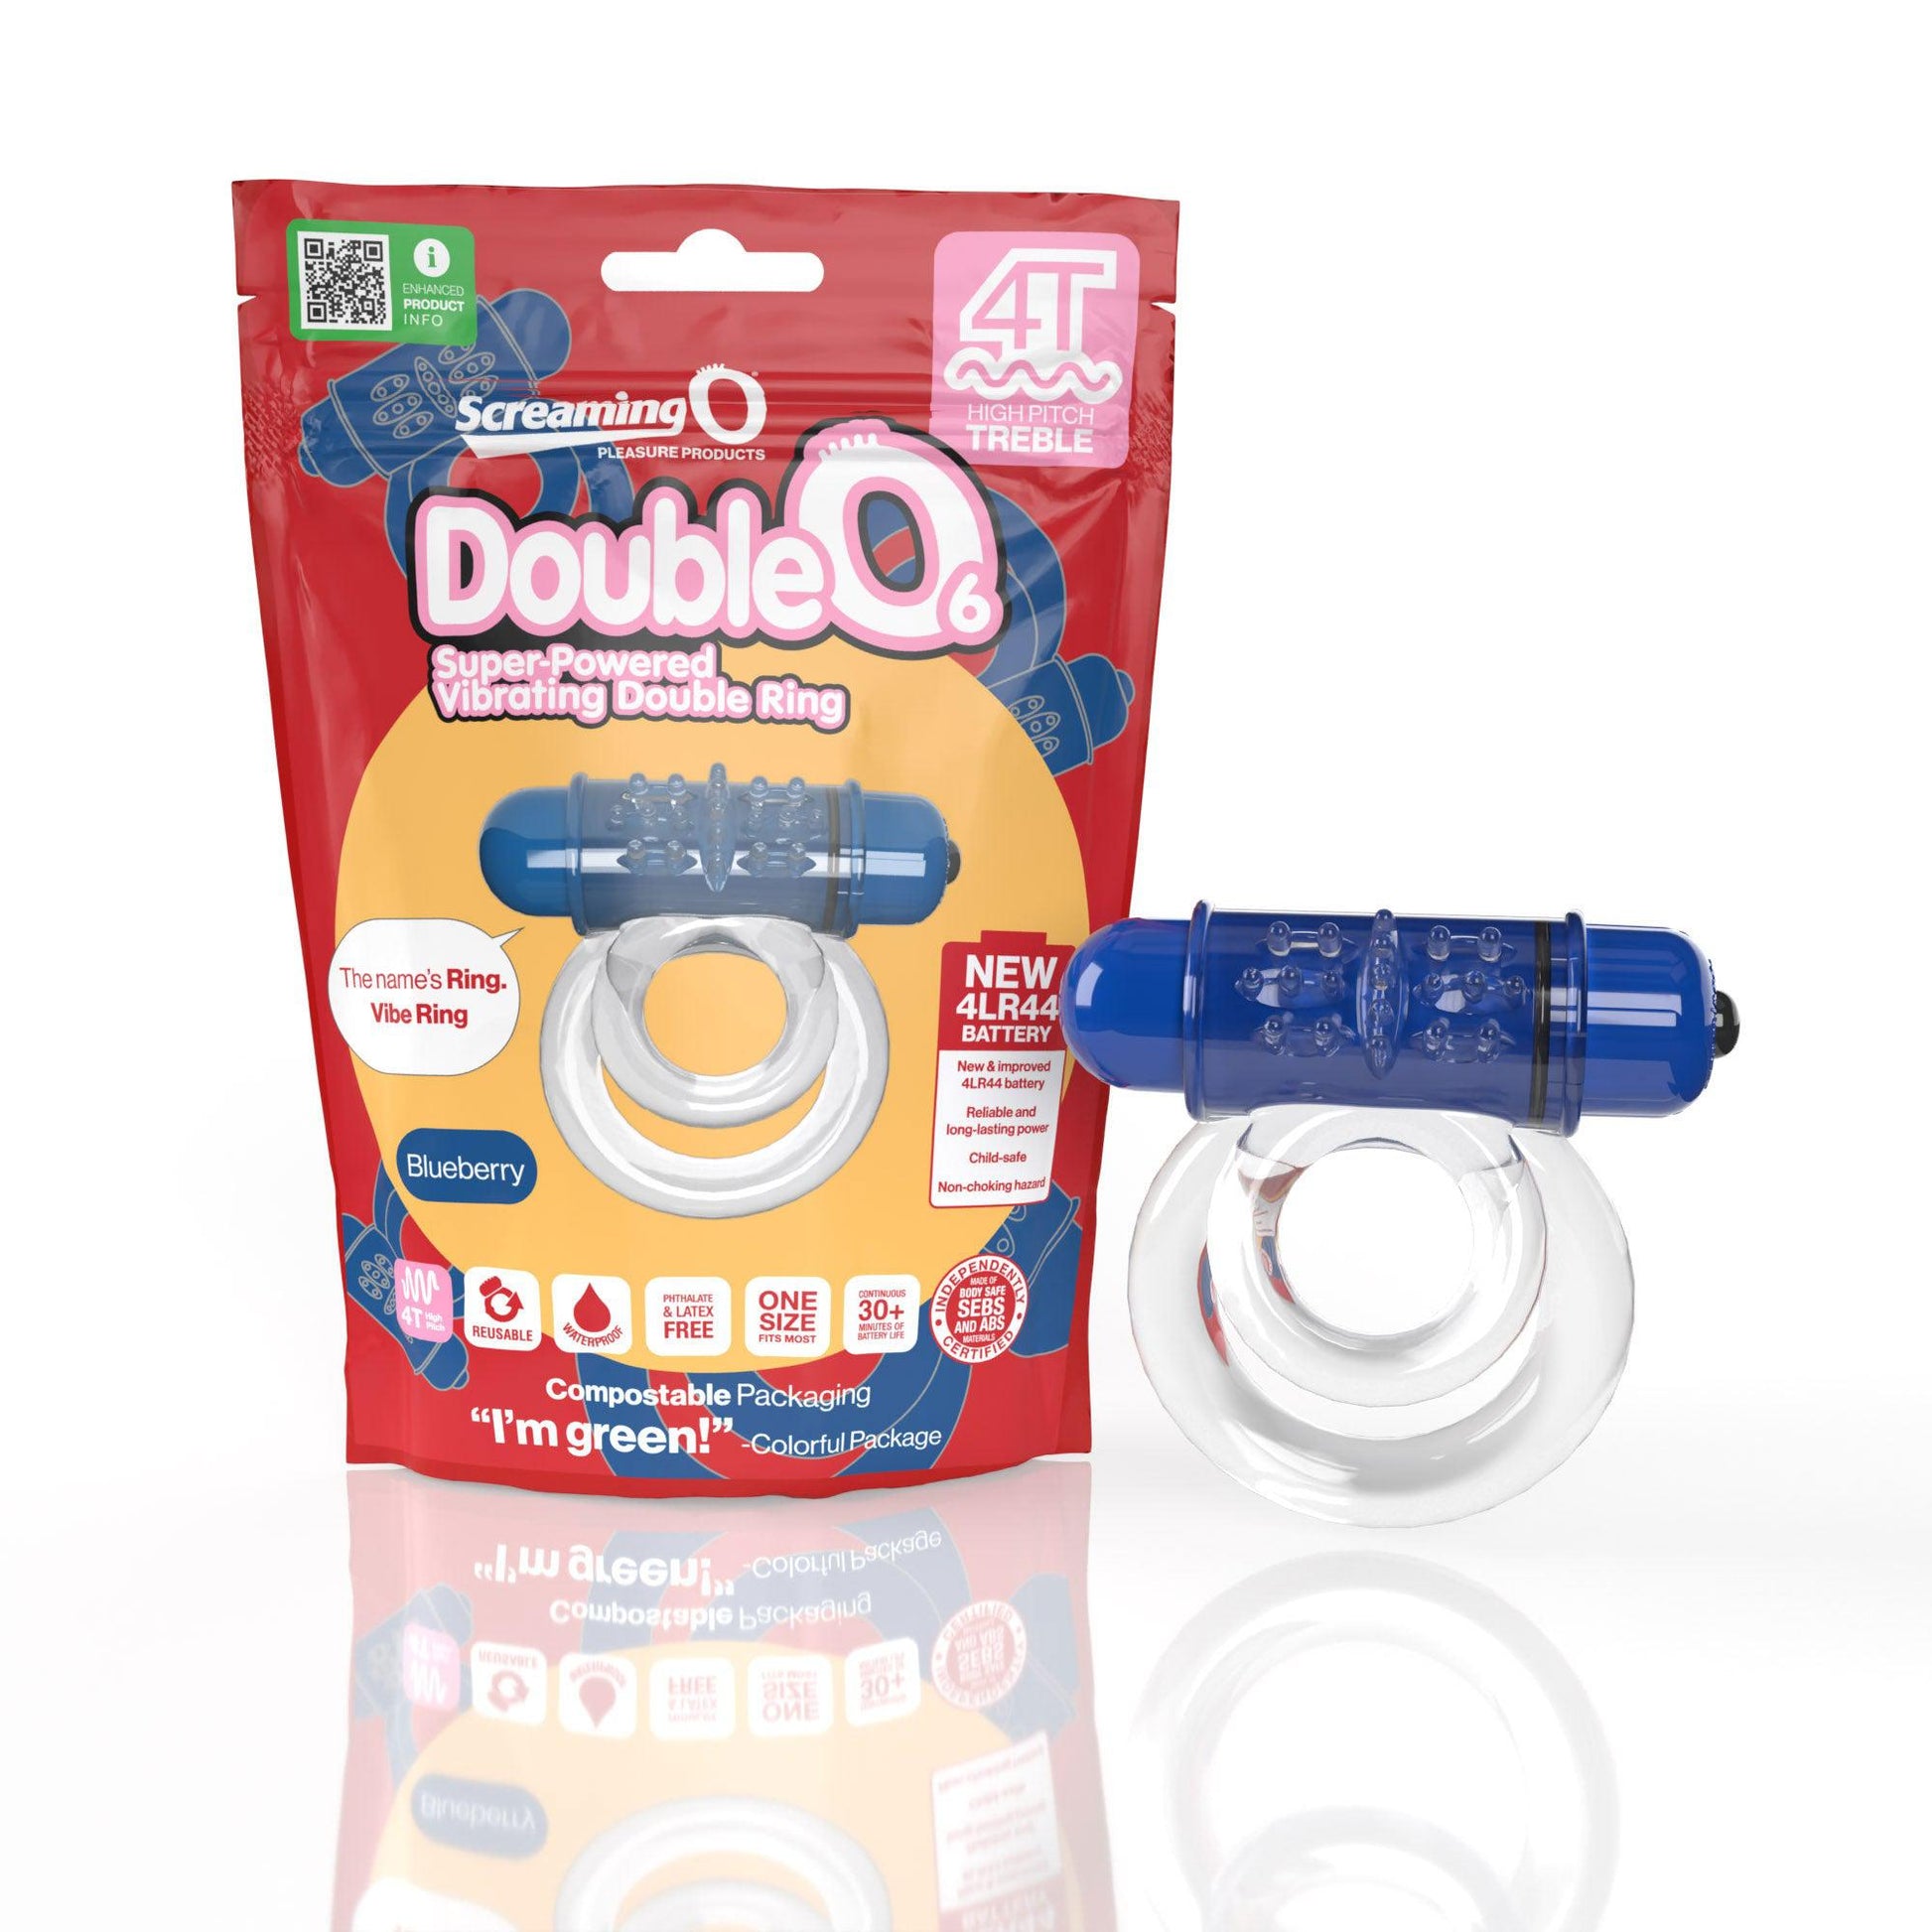 Screaming O 4t - Double O 6 Super Powered   Vibrating Double Ring - Blueberry